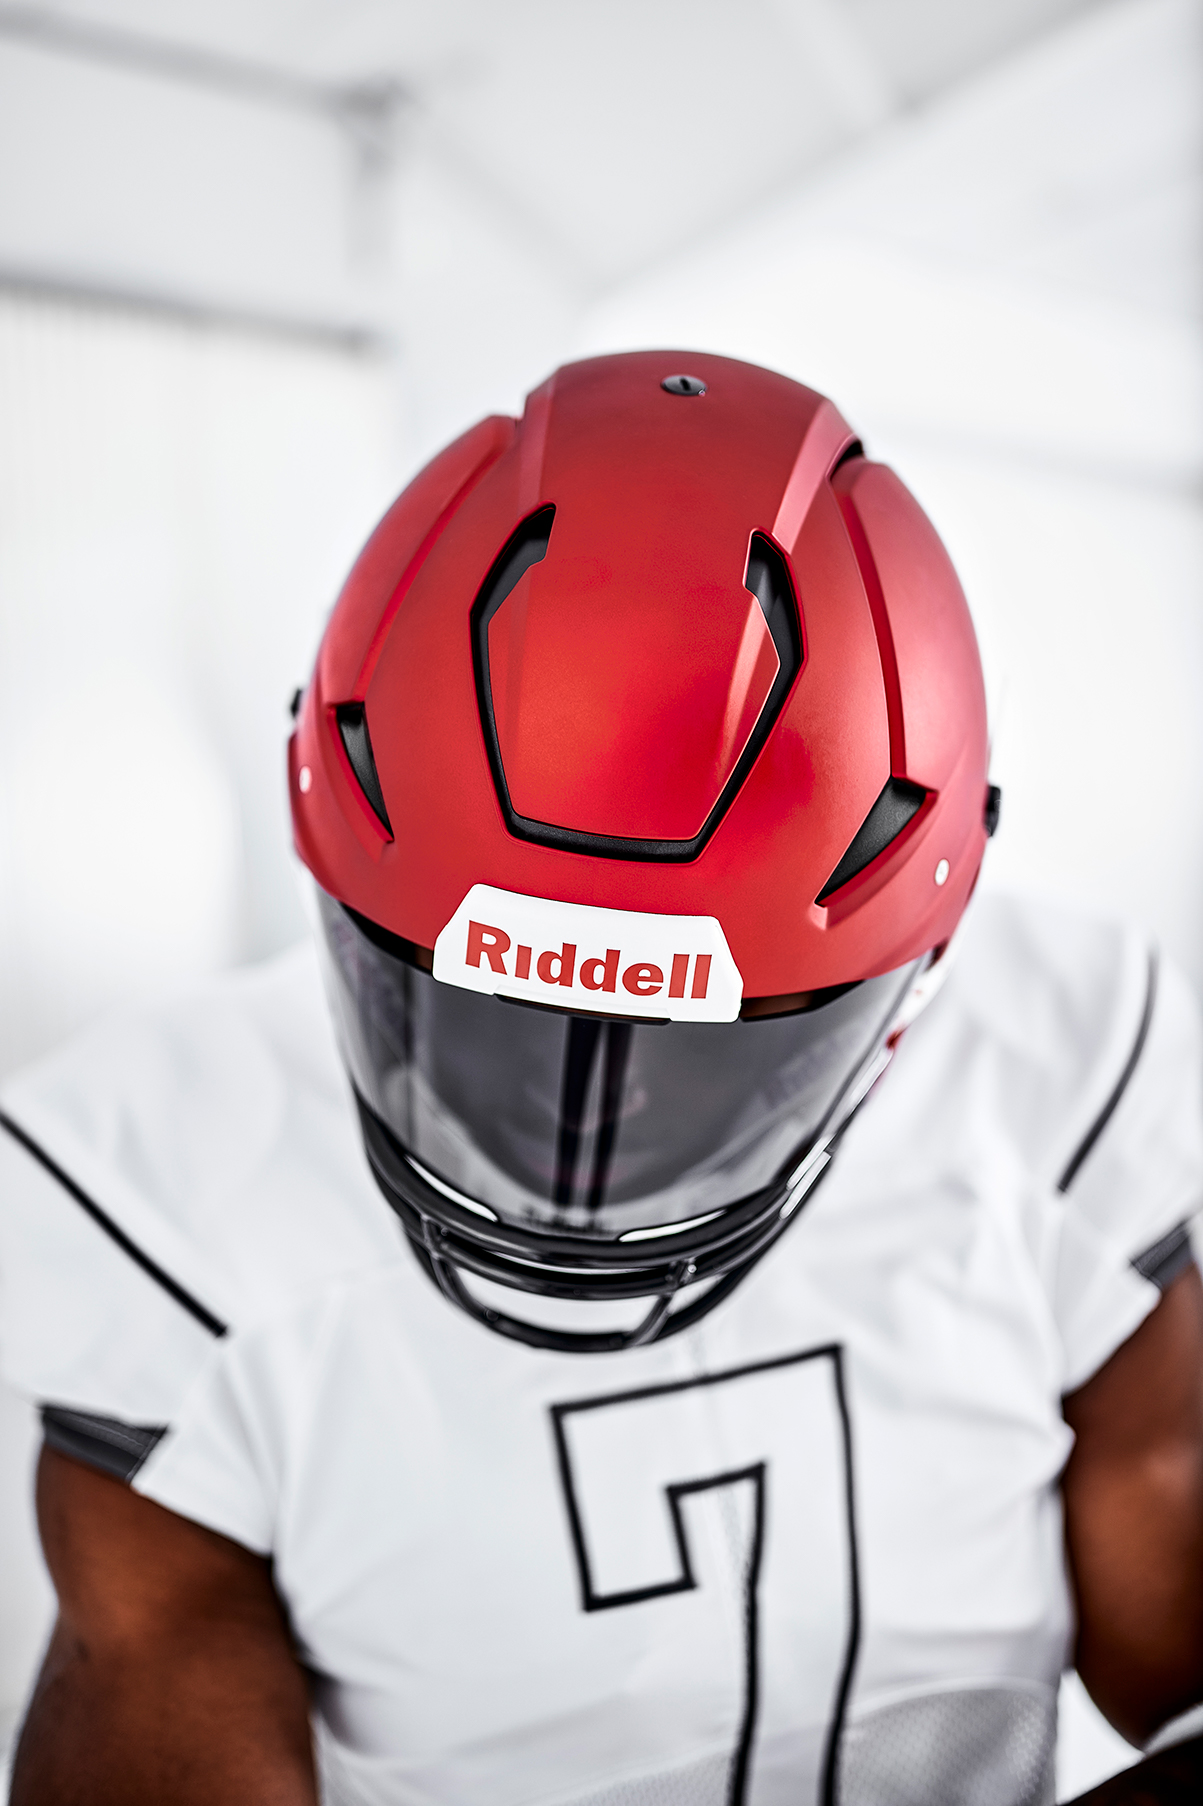 Features unique to the Riddell Axiom